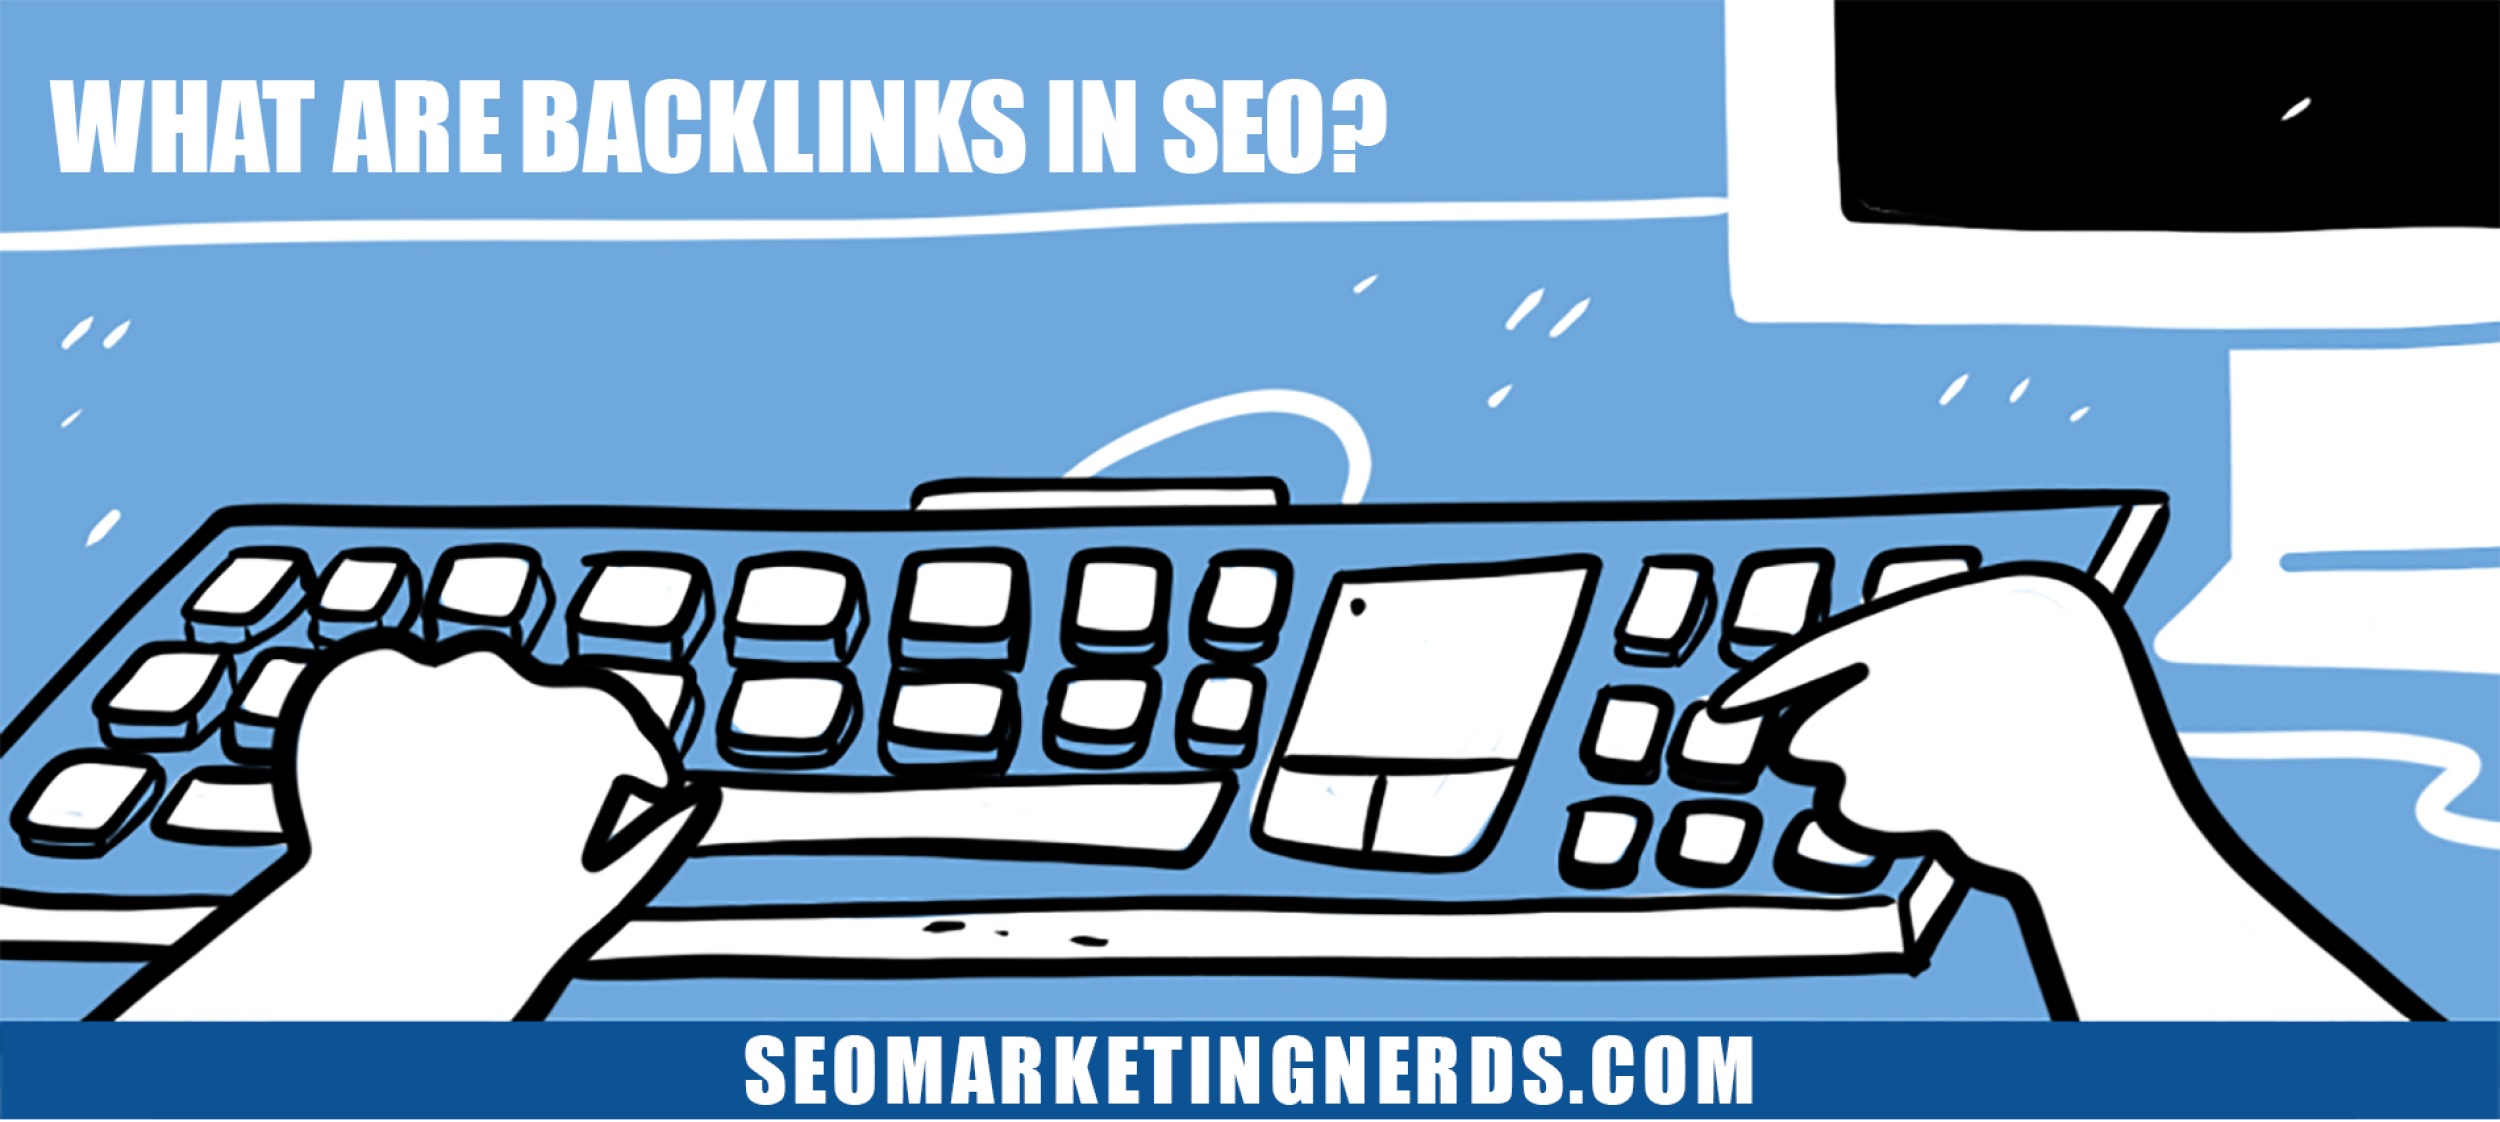 What Are Backlinks in SEO?